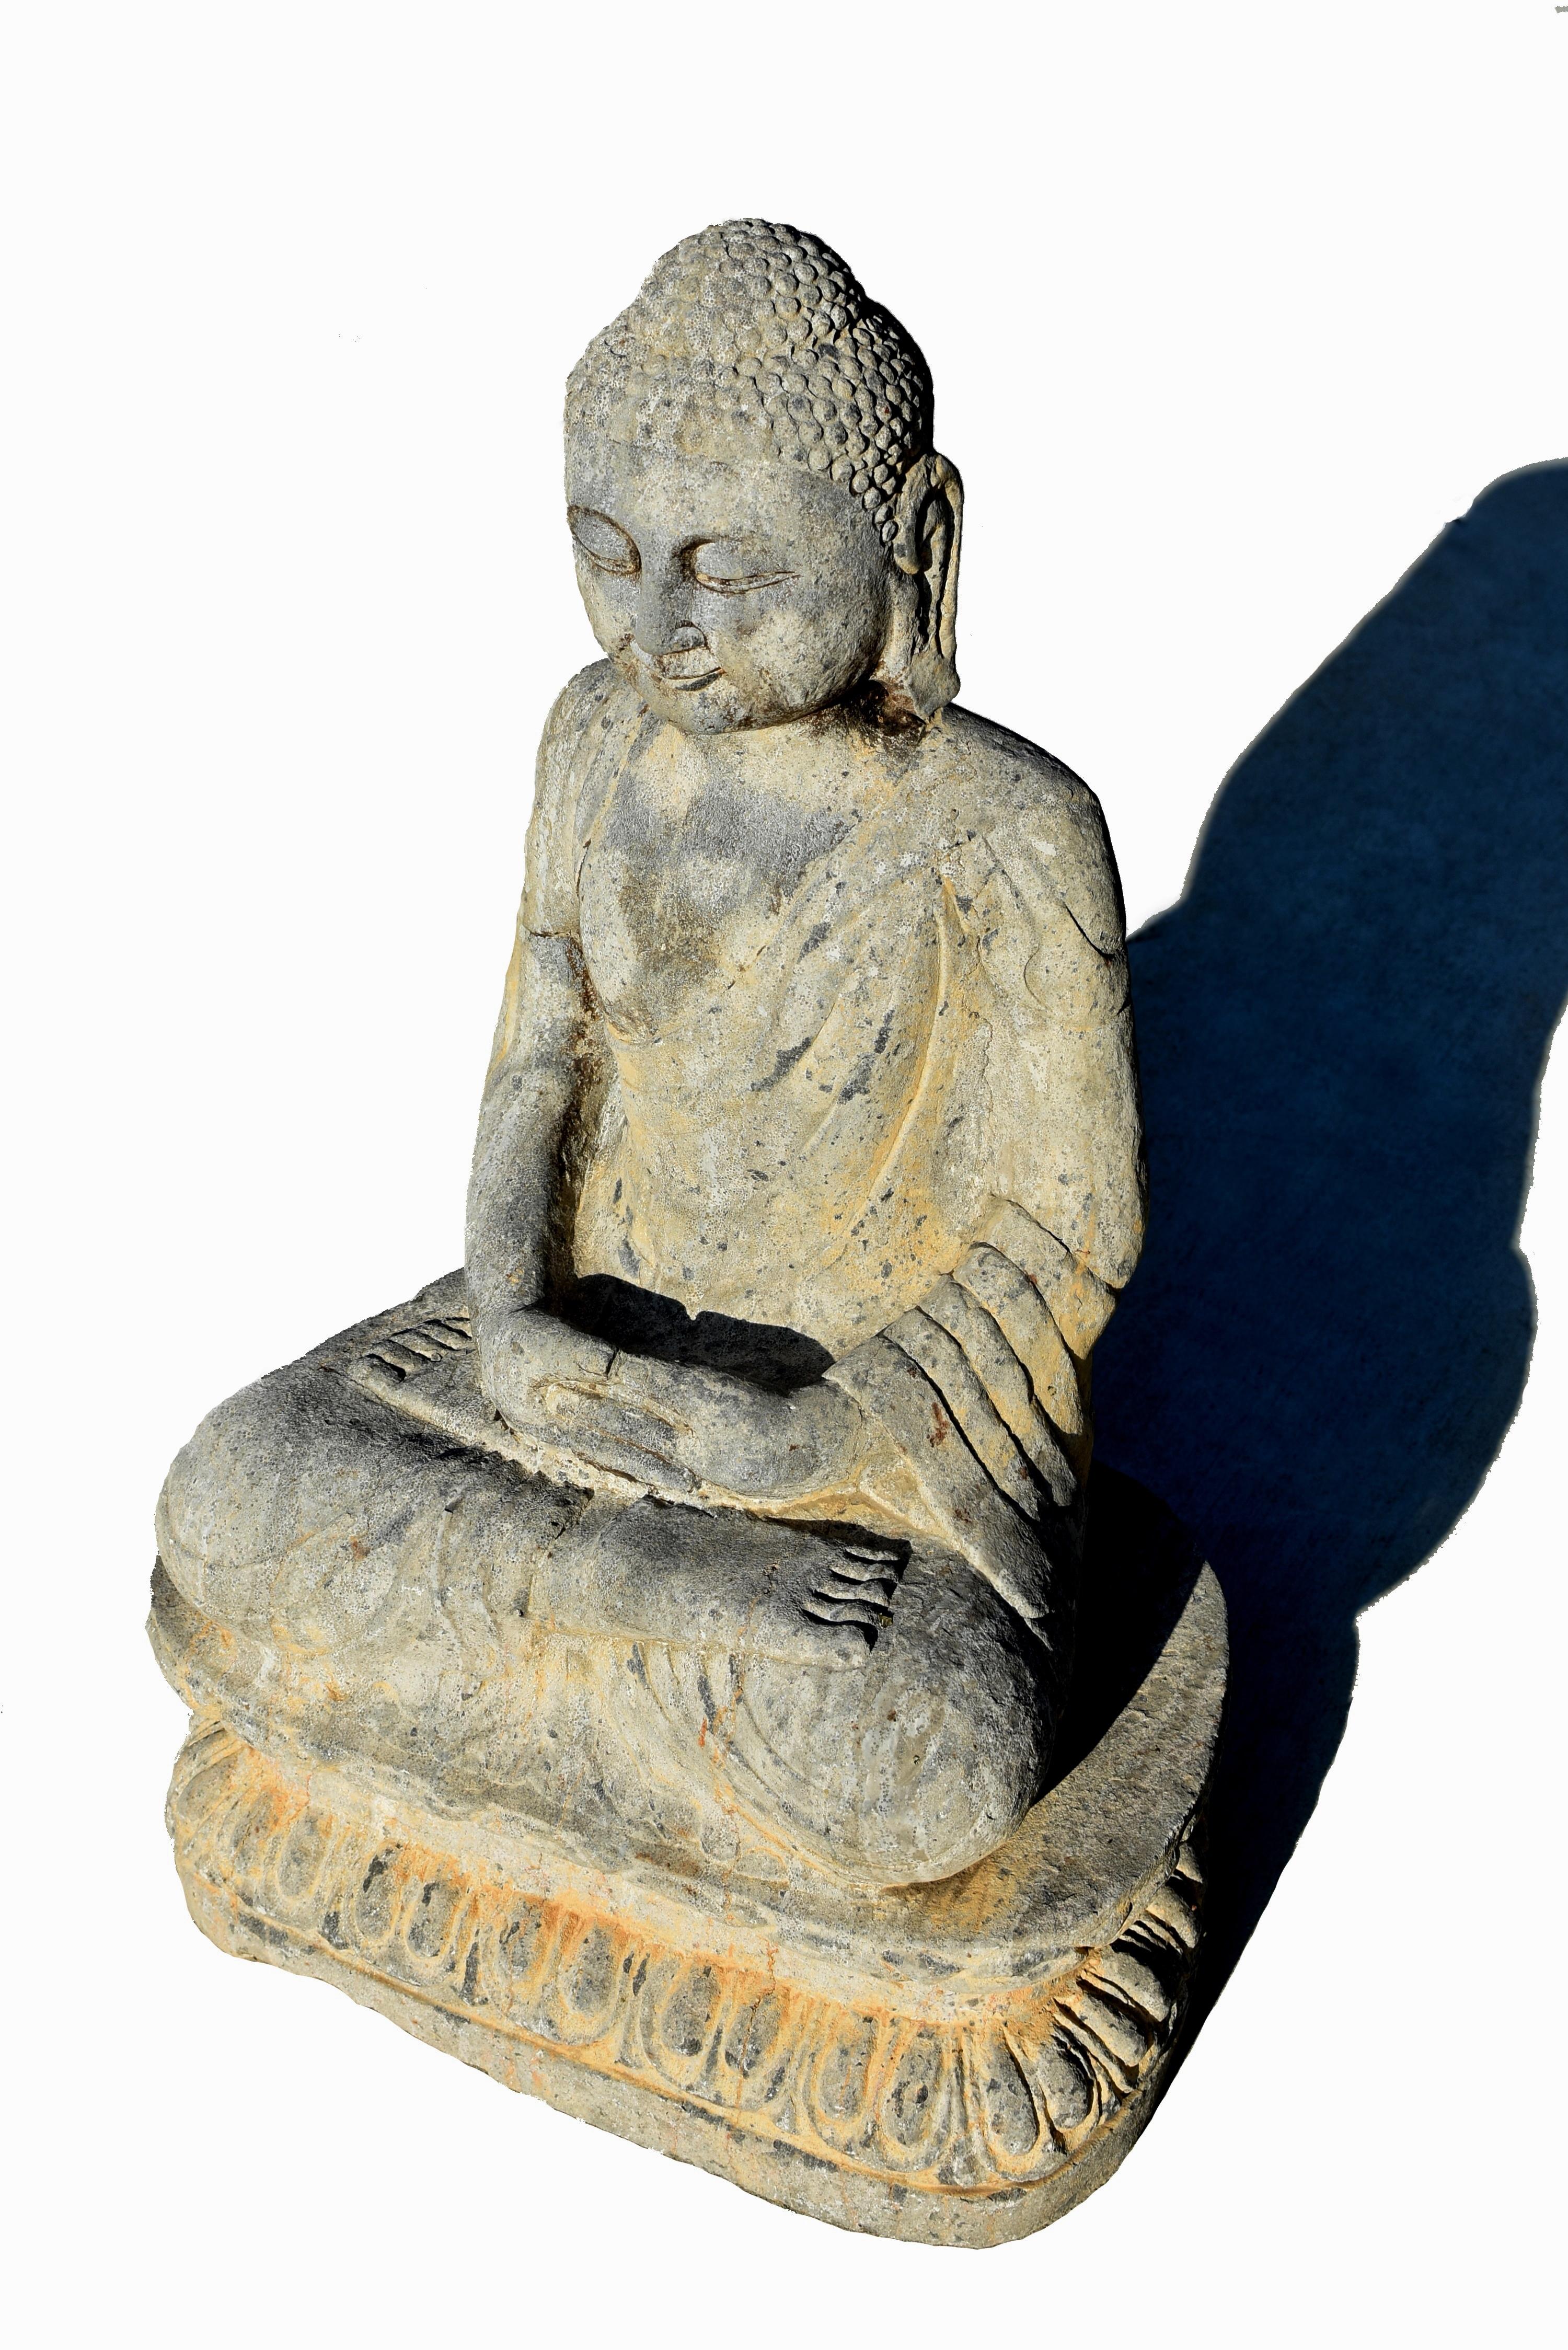 A beautiful antique stone Buddha Shakyamuni. Seated in dhyana asana on a double lotus throne, hands in dhyana mudra, wearing a sanghati pleated end draped over his left shoulder and folded neatly under his legs. Portrayed with a serene face framed